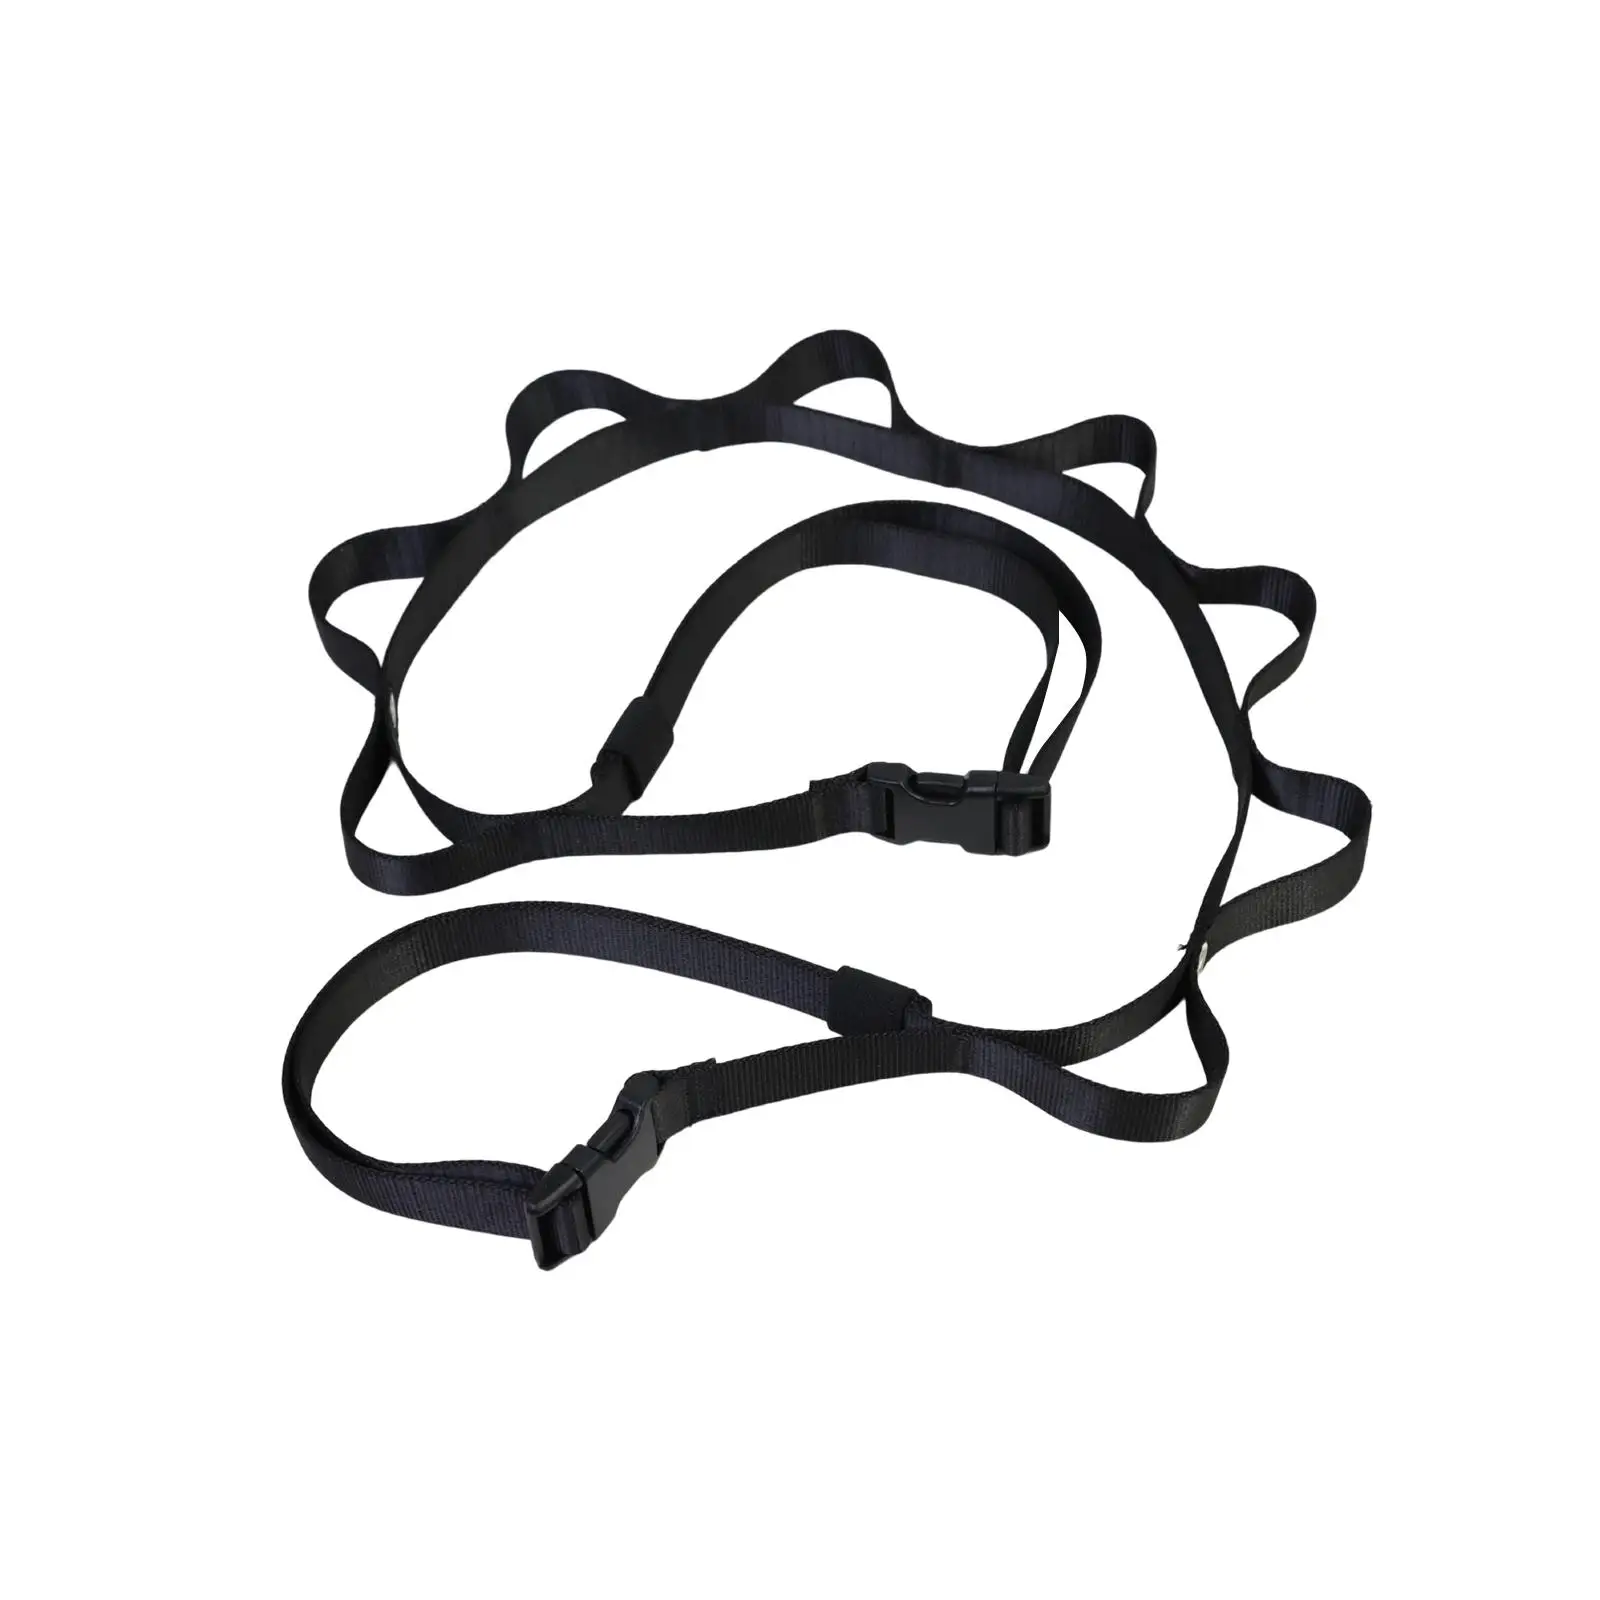 Car Clothesline Clothes Hanger Luggage Straps for Camping Luggage Rack RV